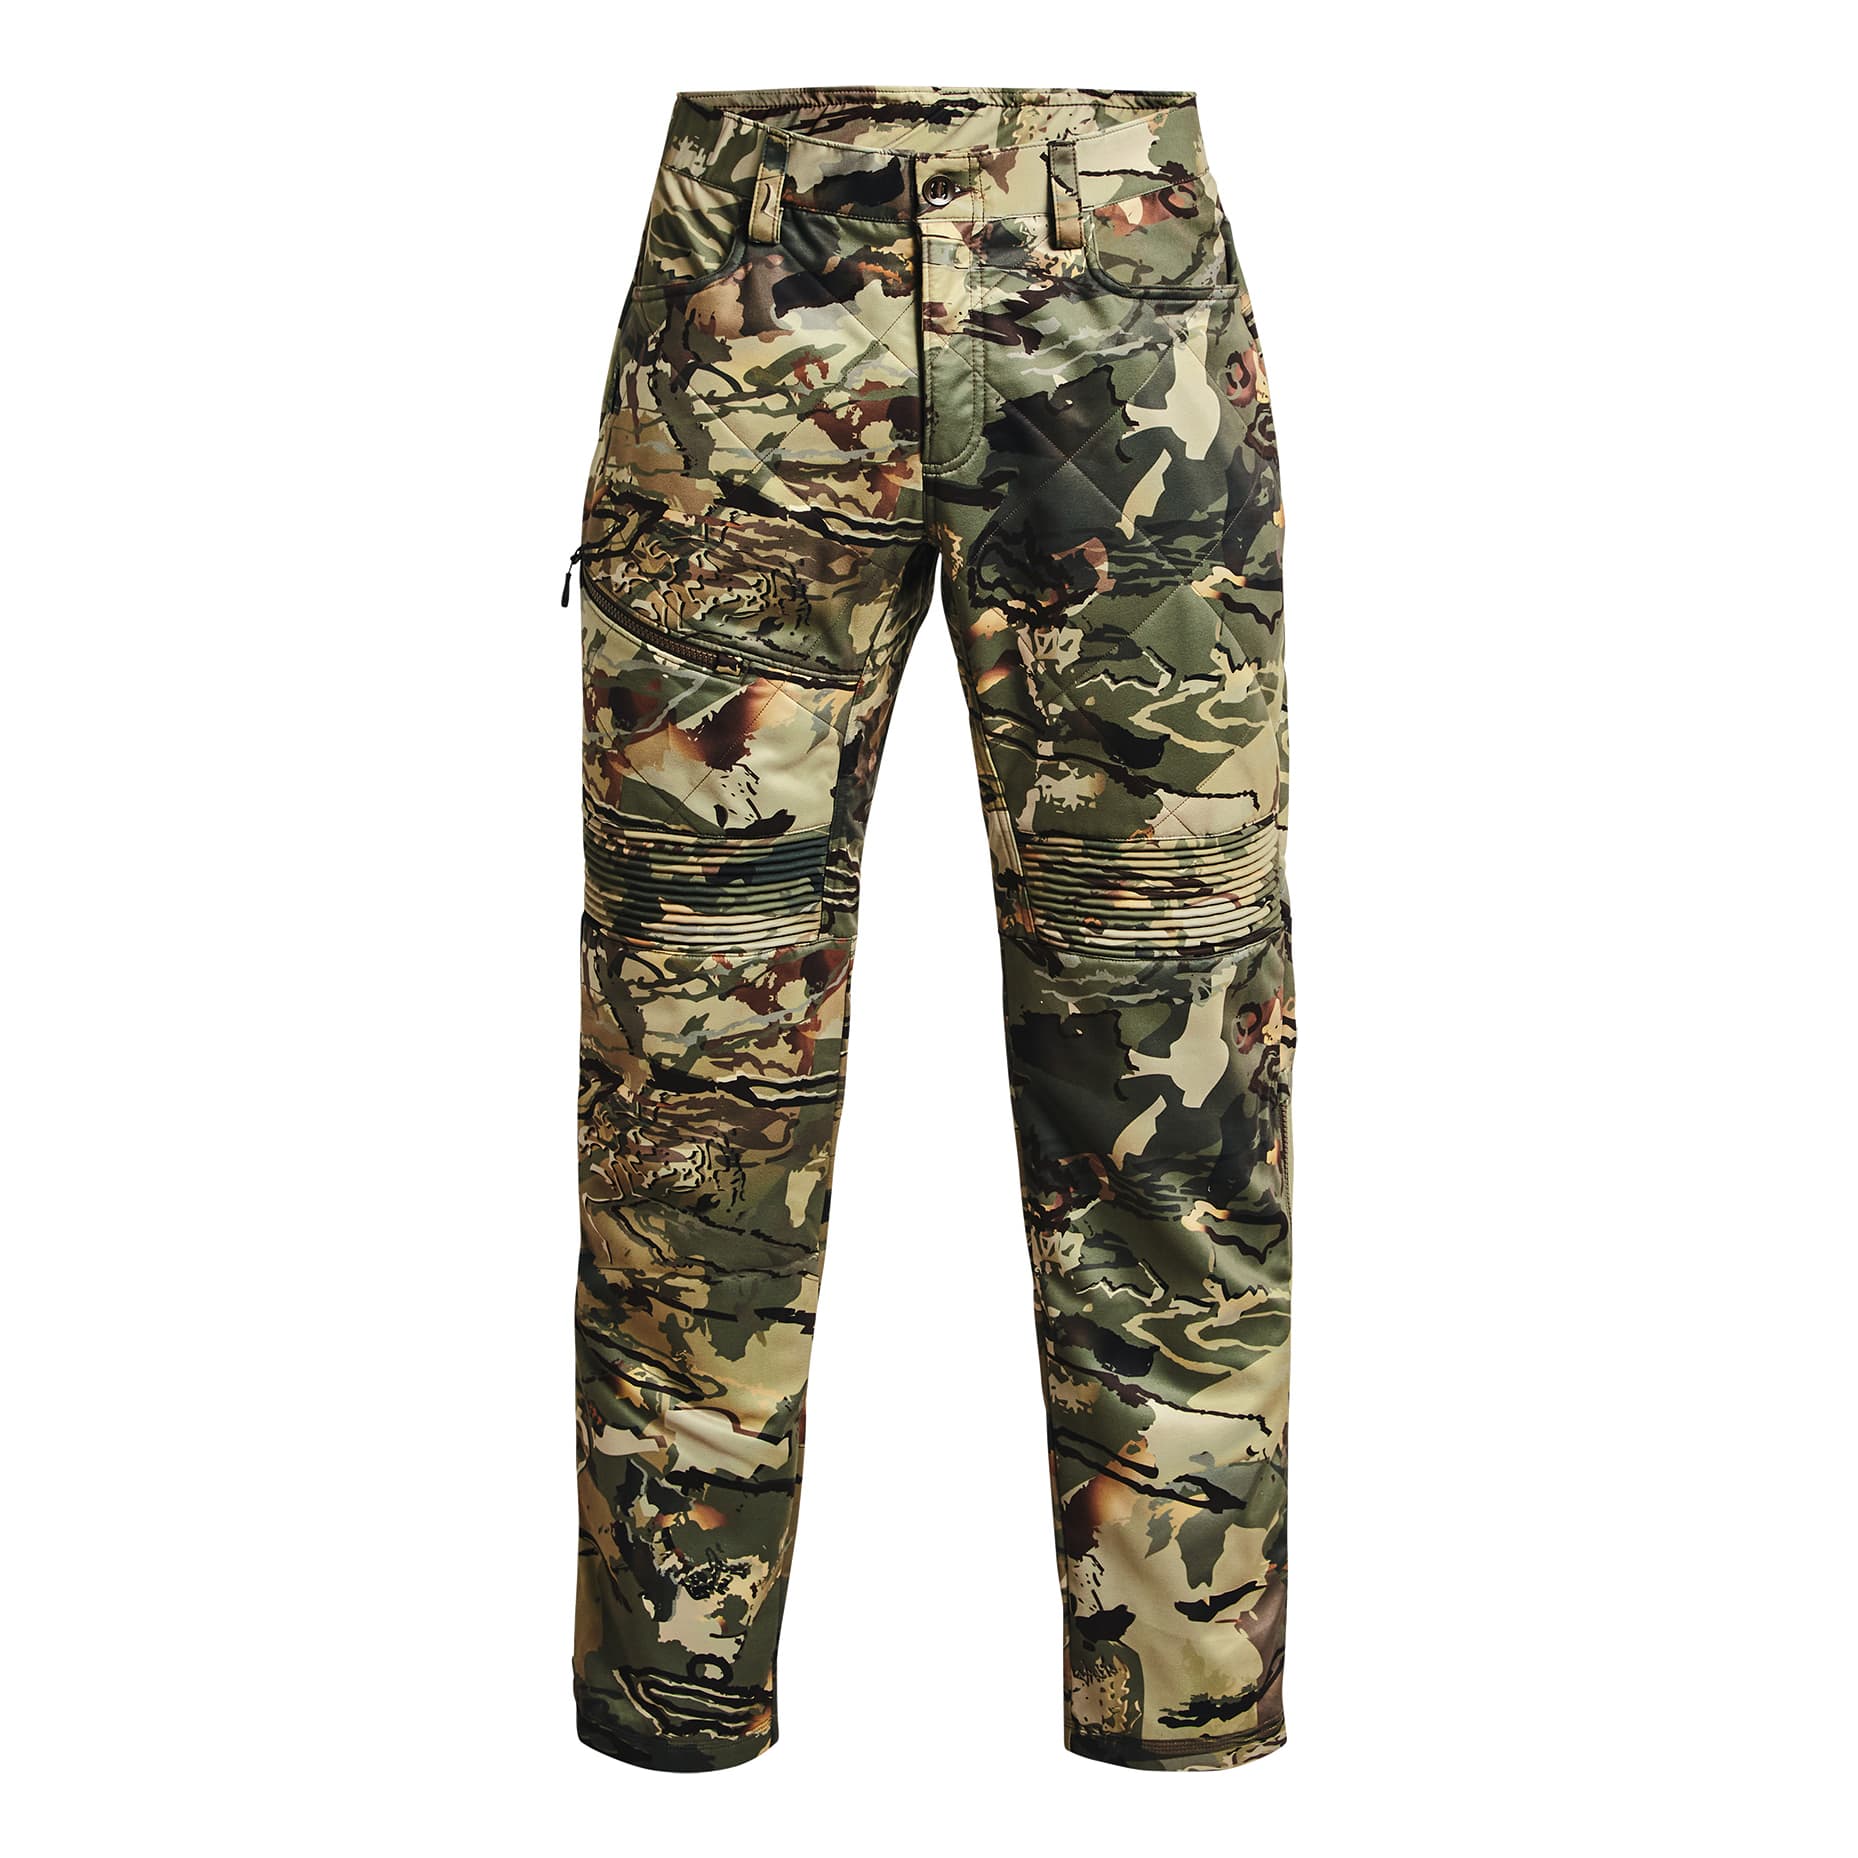 Under Armour® Men’s Brow Tine ColdGear® Infrared Pants - Forest Camo/Black